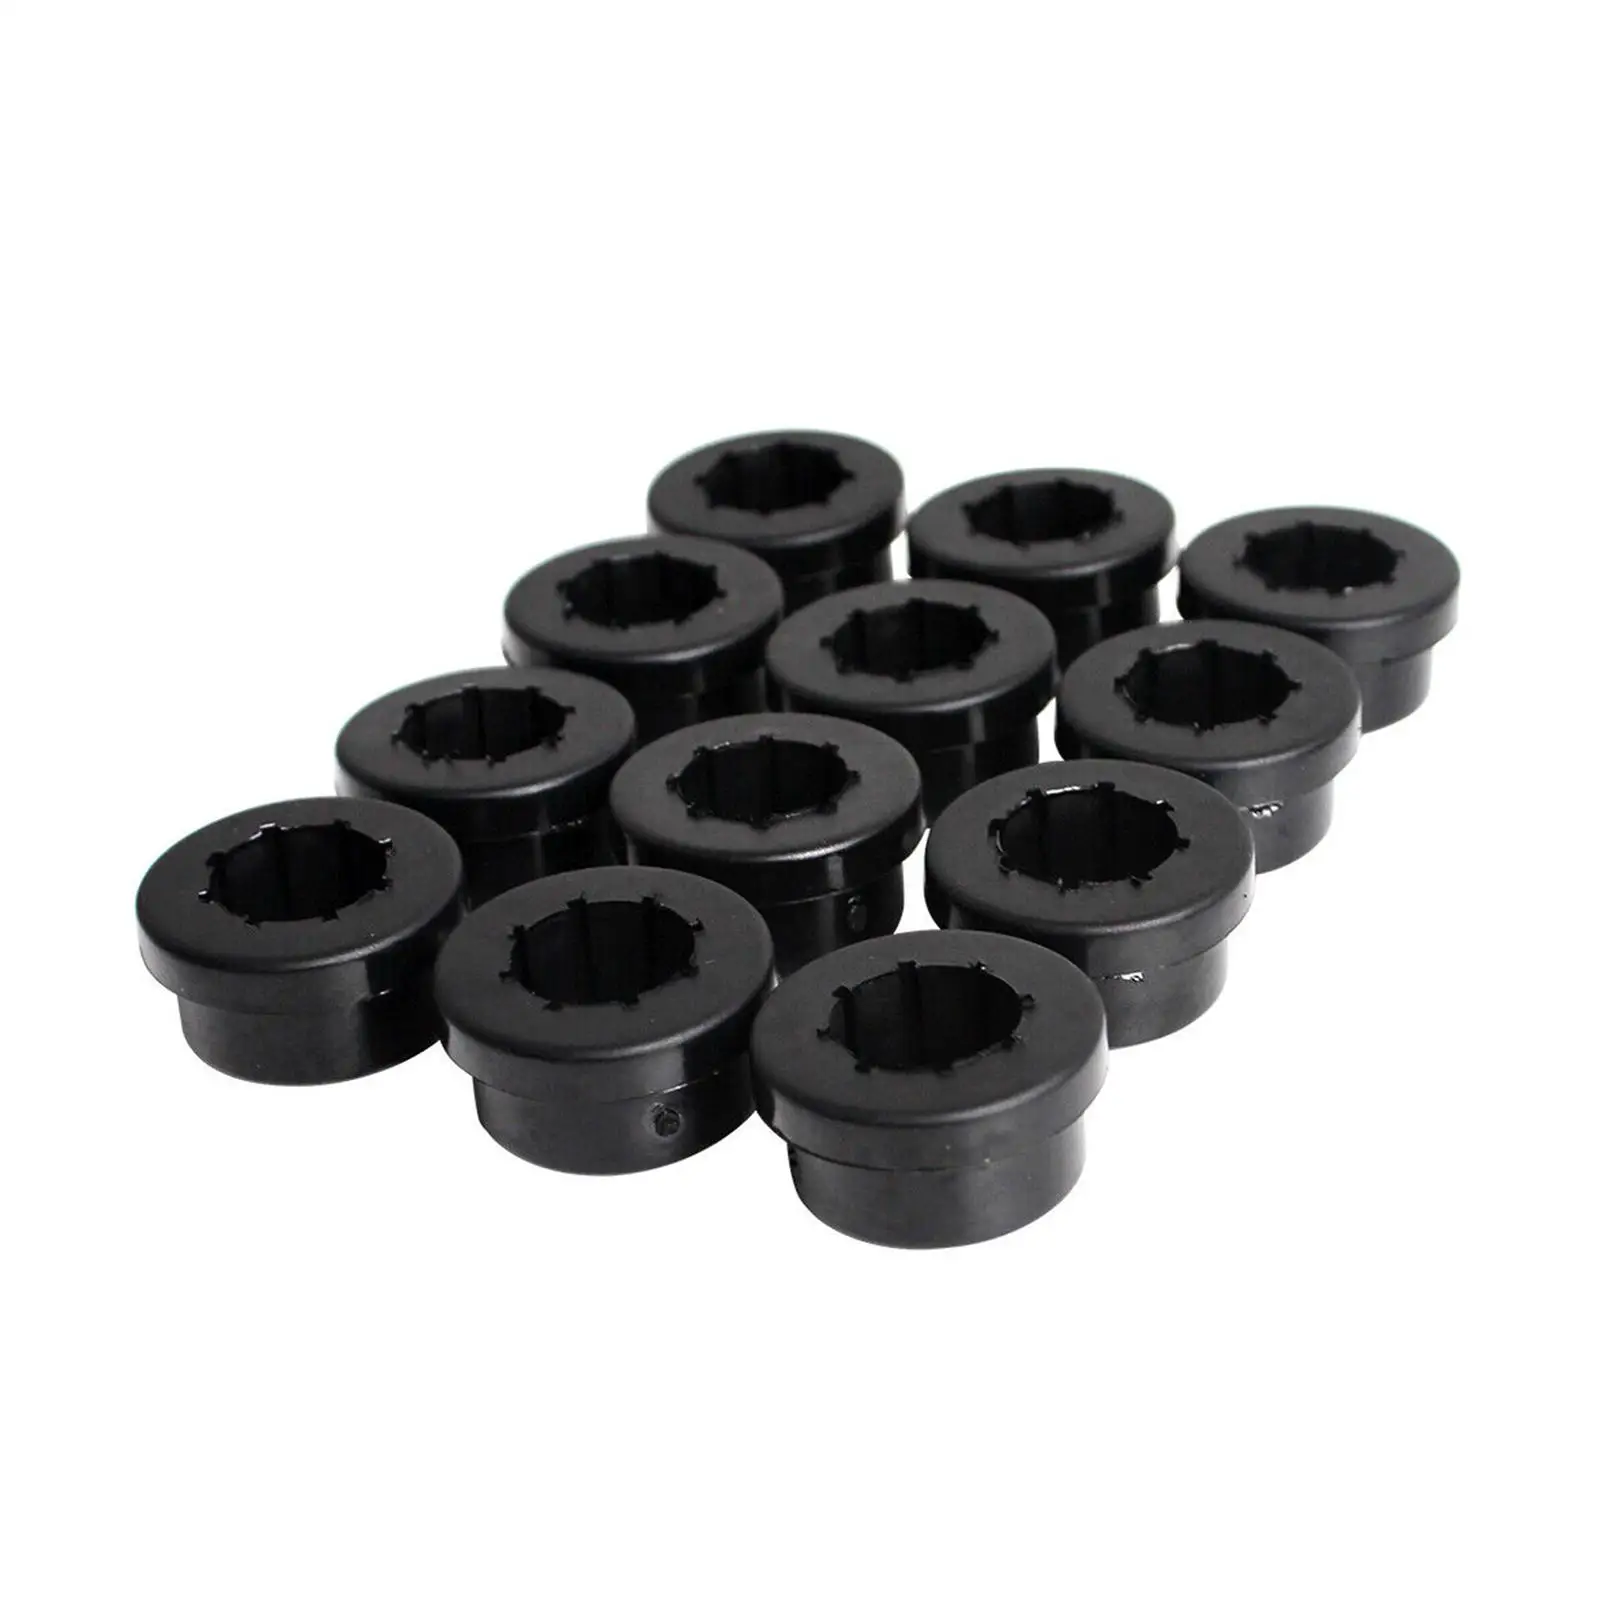 12x Rear Camber Bushings Directly Replace for Skunk2 Eg EK DC Accessory